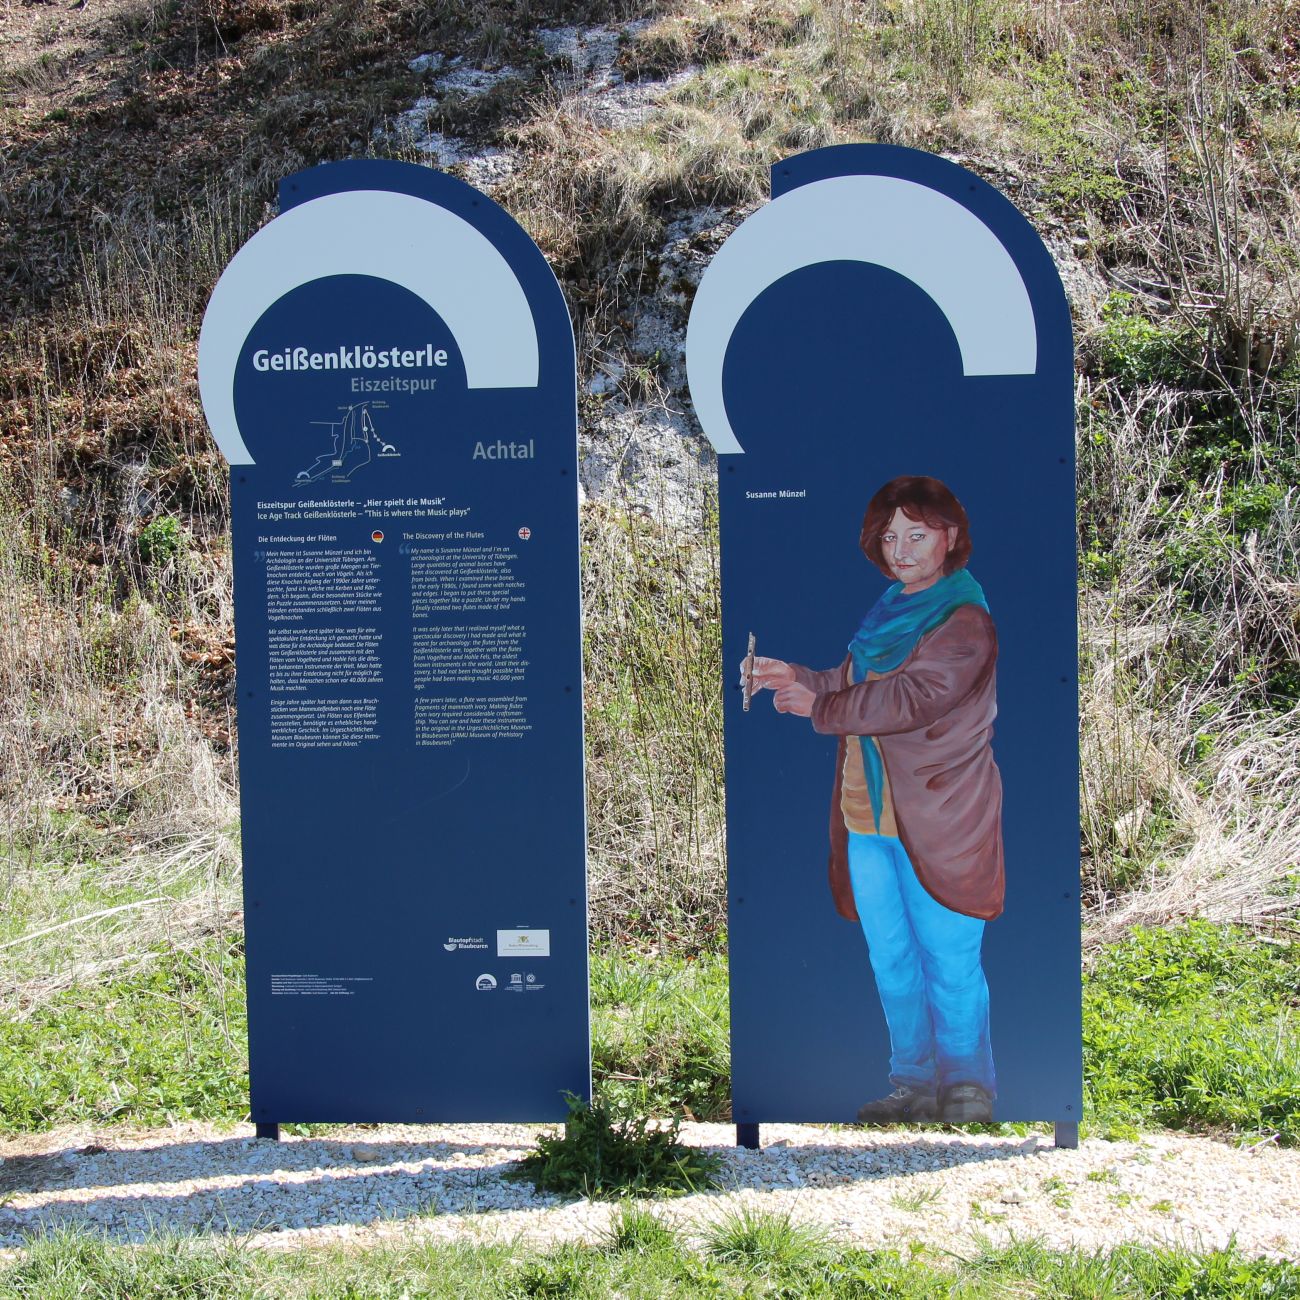 two outdoor information panels with text and images